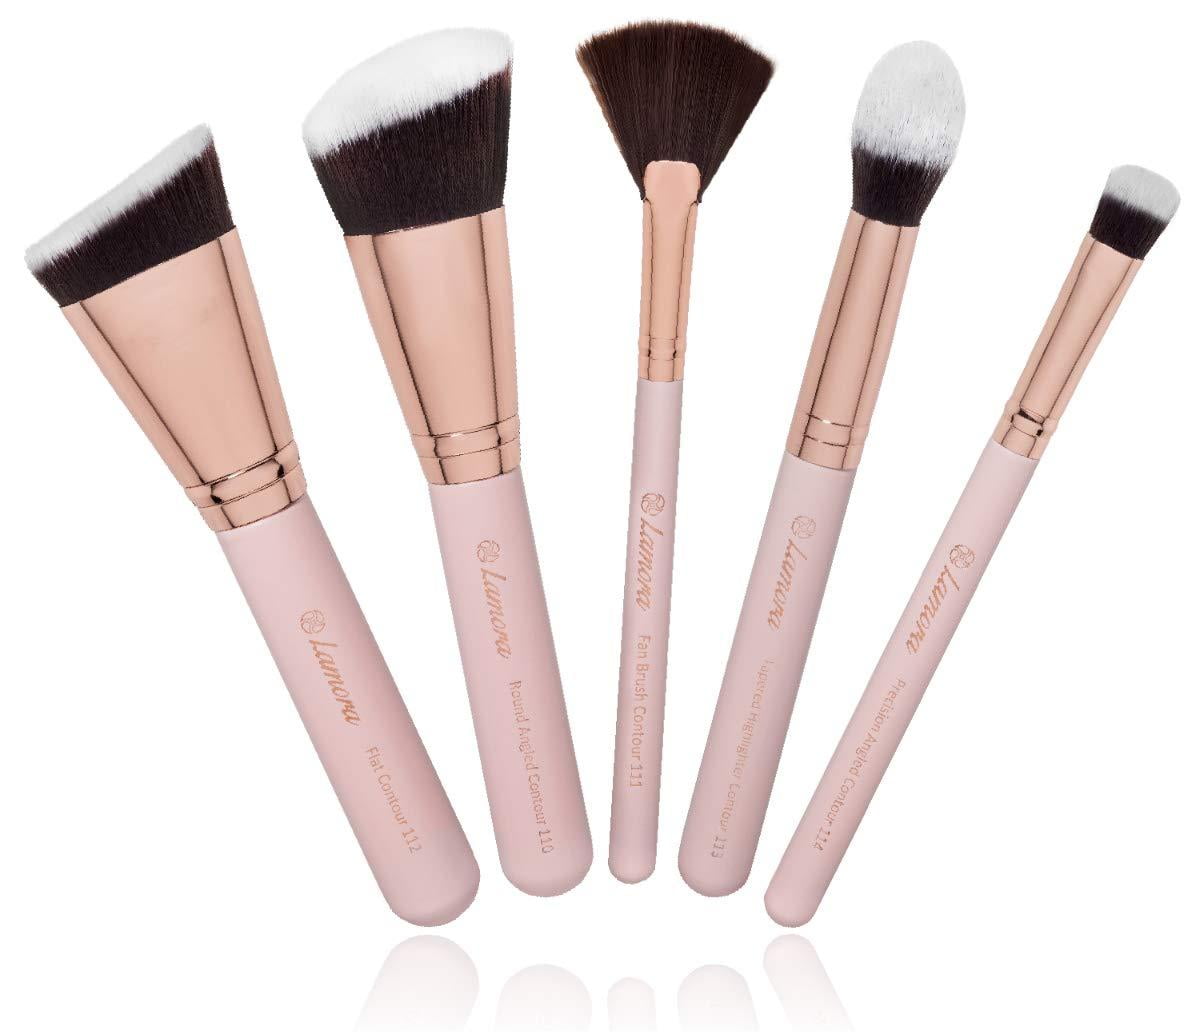 Pro Face Contour Brush Set - Synthetic Contouring Sculpting and Highlighting Kit - Cream Blush Powder Flat Nose Round Small Angled Fan Tapered Precision Foundation Makeup Brus - Walmart.com